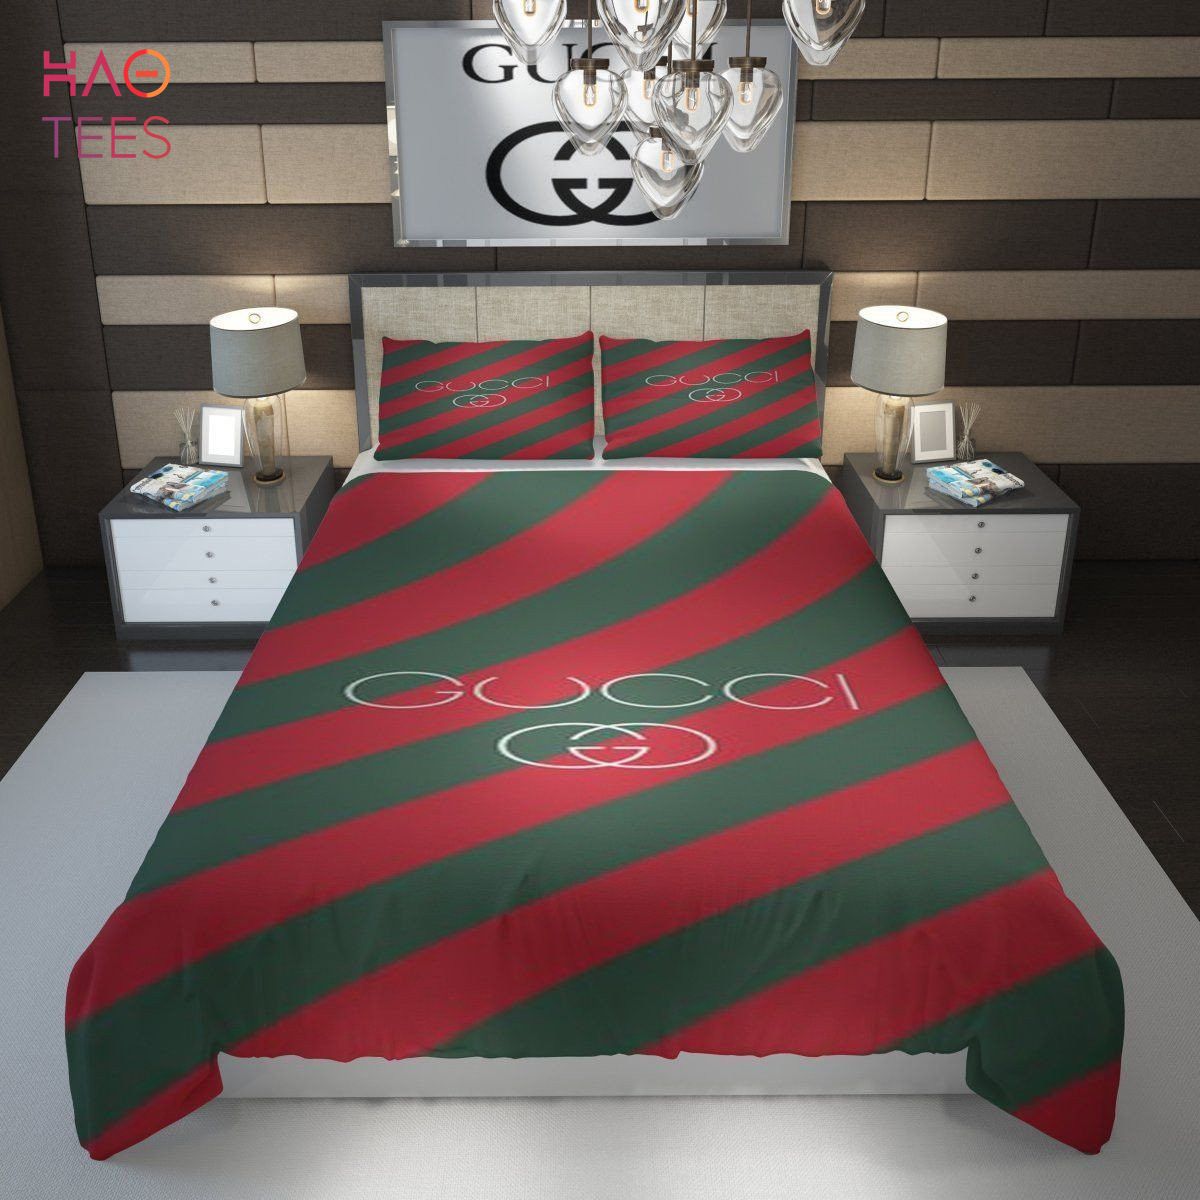 Stripe Lines Italian Luxury Brand Inspired 3D Personalized Customized Bedding Sets